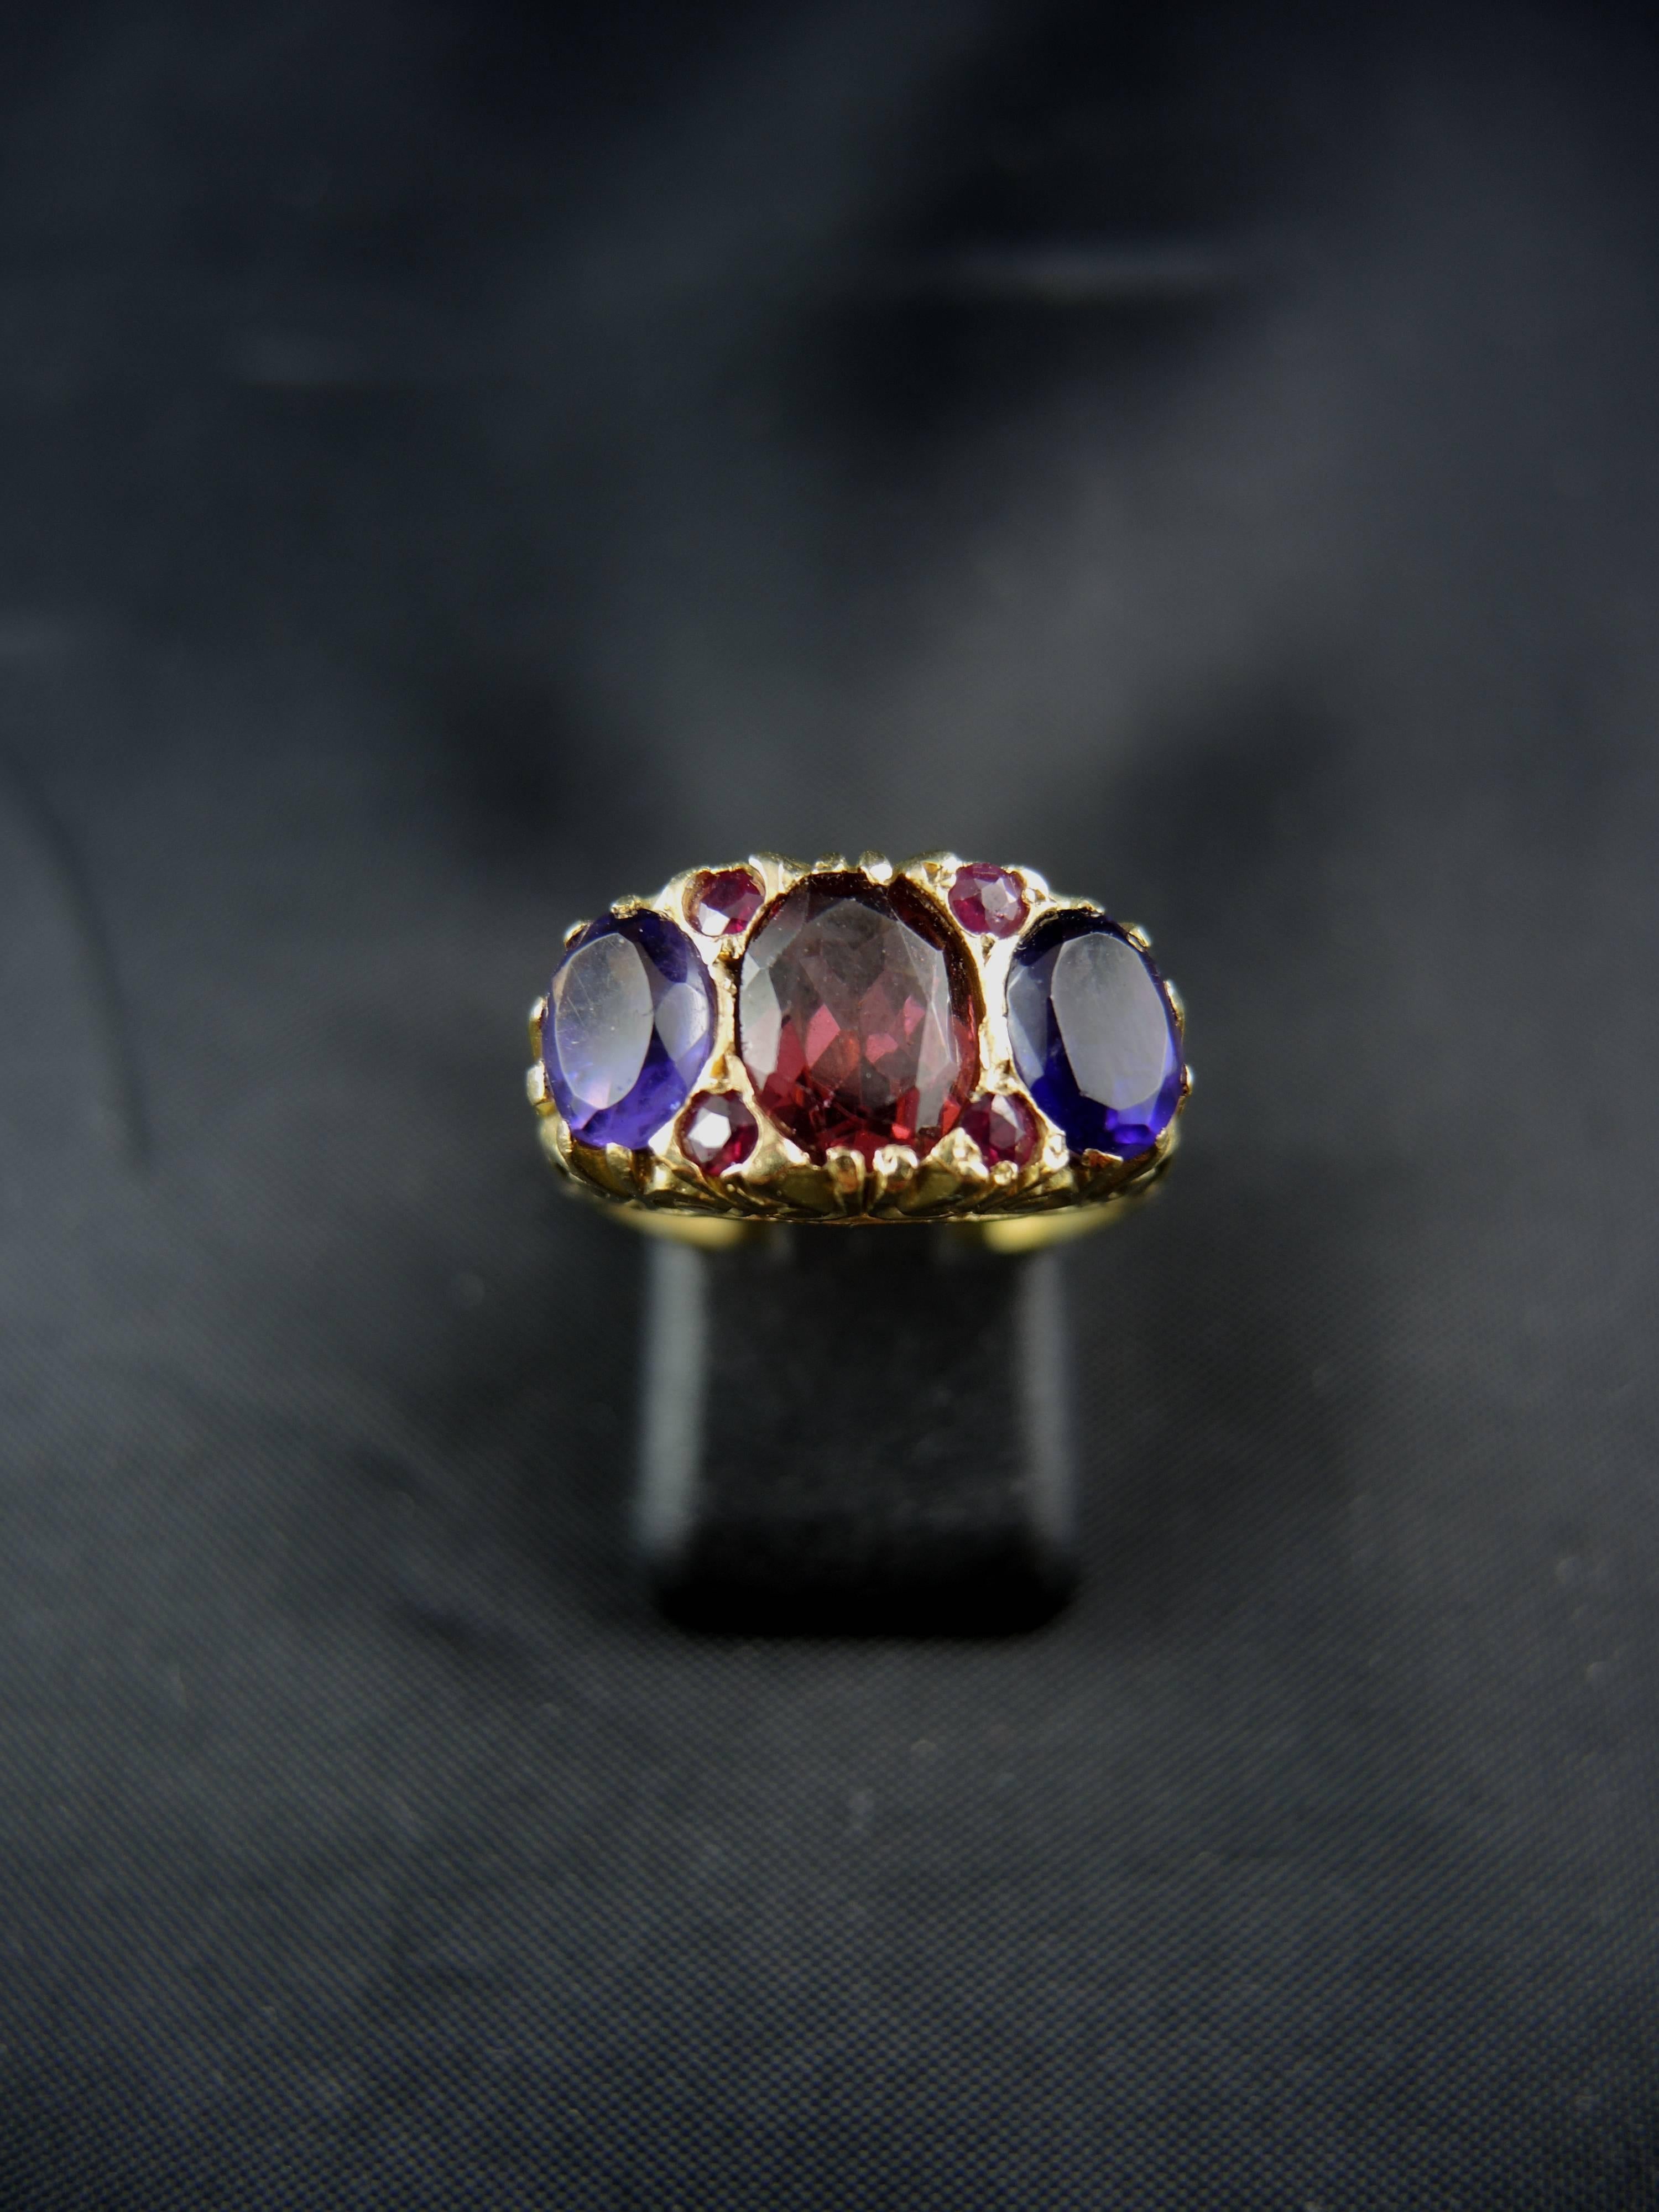 18kt yellow gold antique ring (quality mark: eagle's head) set with a central garnet, two amethysts, and four little rubies. 

French work from the 19th century.

Weight: 6,50 g
Ring size: 52 (diameter 16,50/ US size 6,00).

State : very little